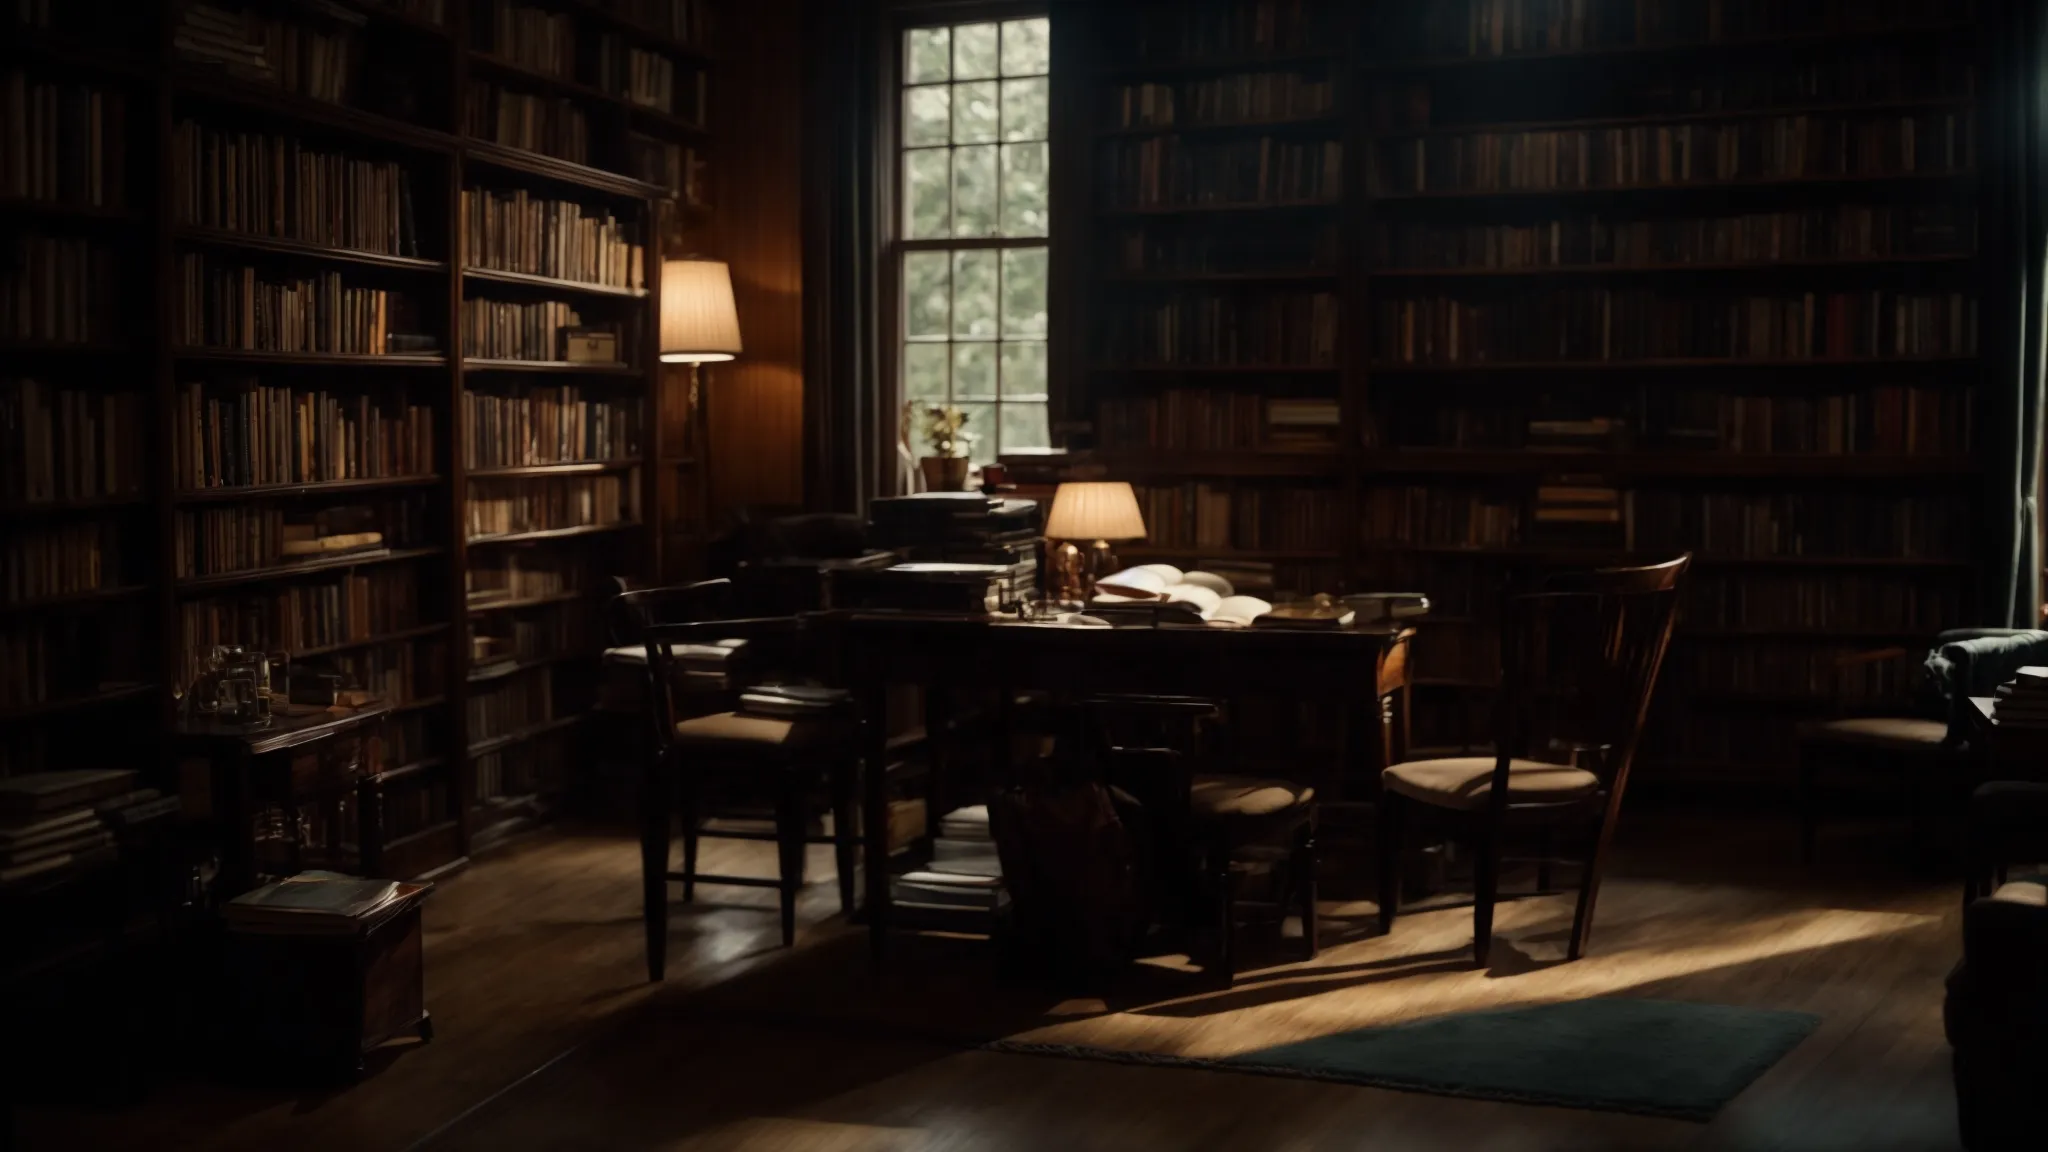 a dimly lit study filled with overflowing bookshelves and an unattended chessboard by the window, suggesting a moment of solitude and contemplation.